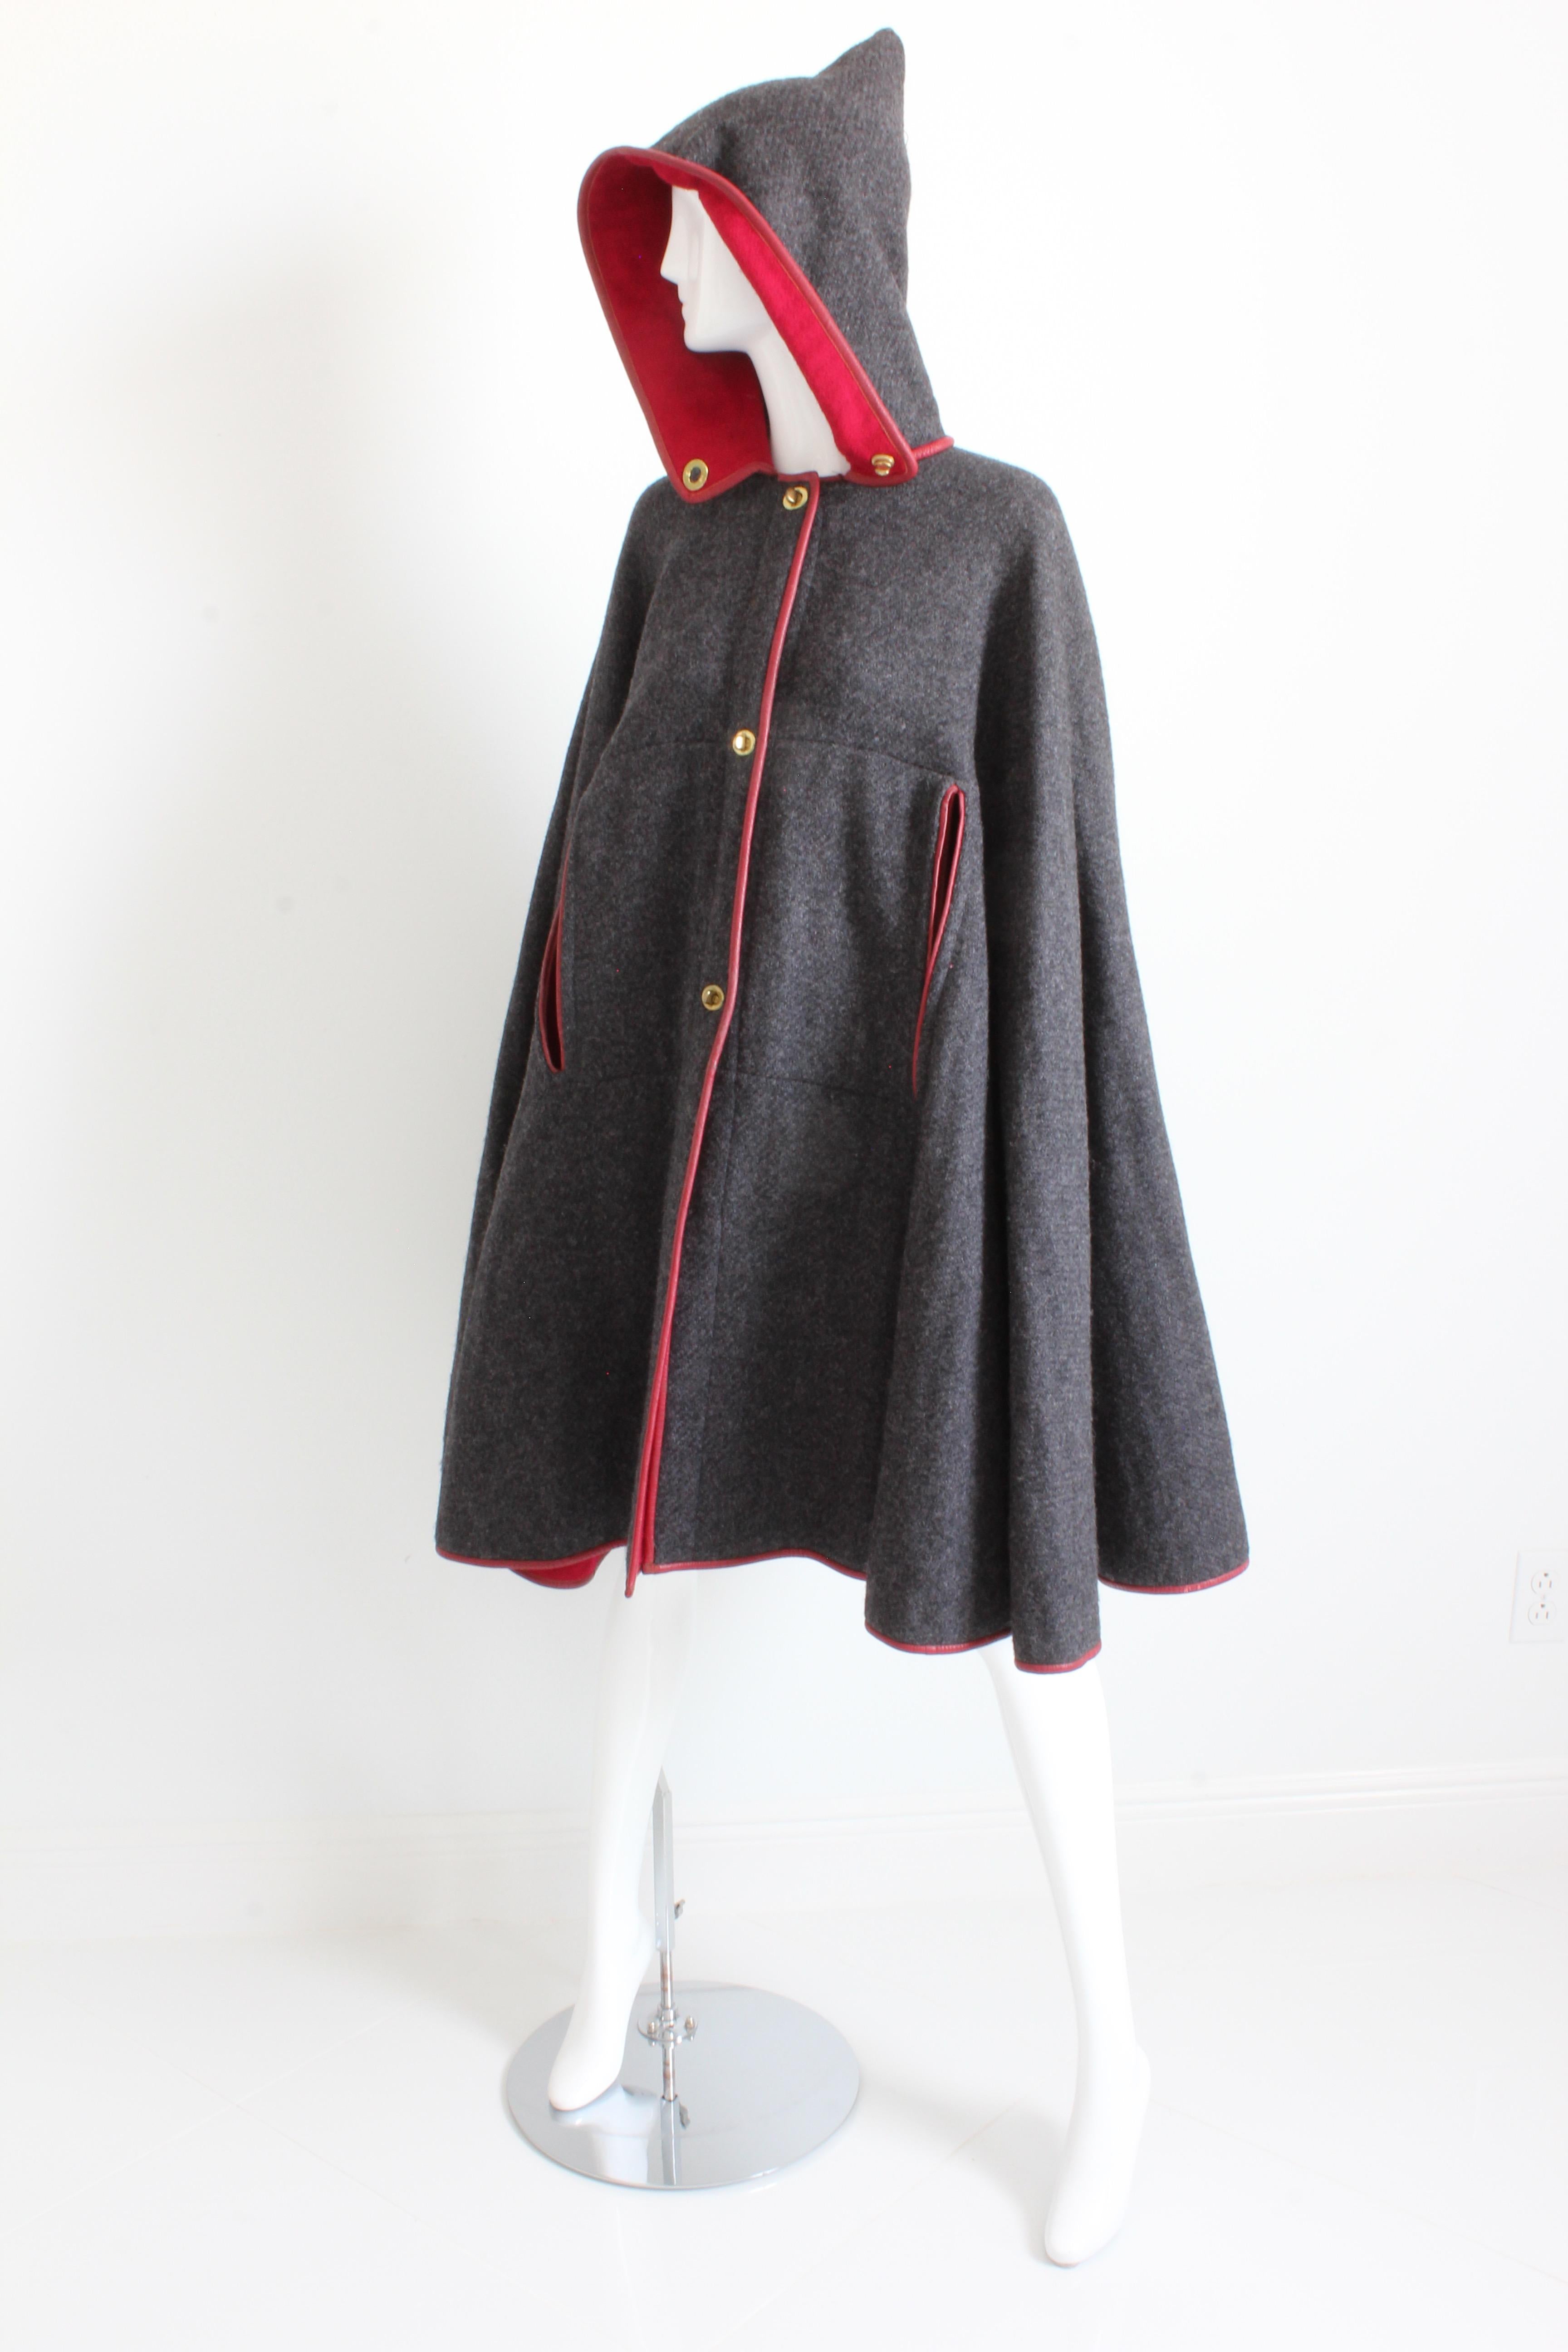 Bonnie Cashin for Sills Cape Hooded Charcoal Wool Red Leather Trim Rare Vintage In Good Condition For Sale In Port Saint Lucie, FL